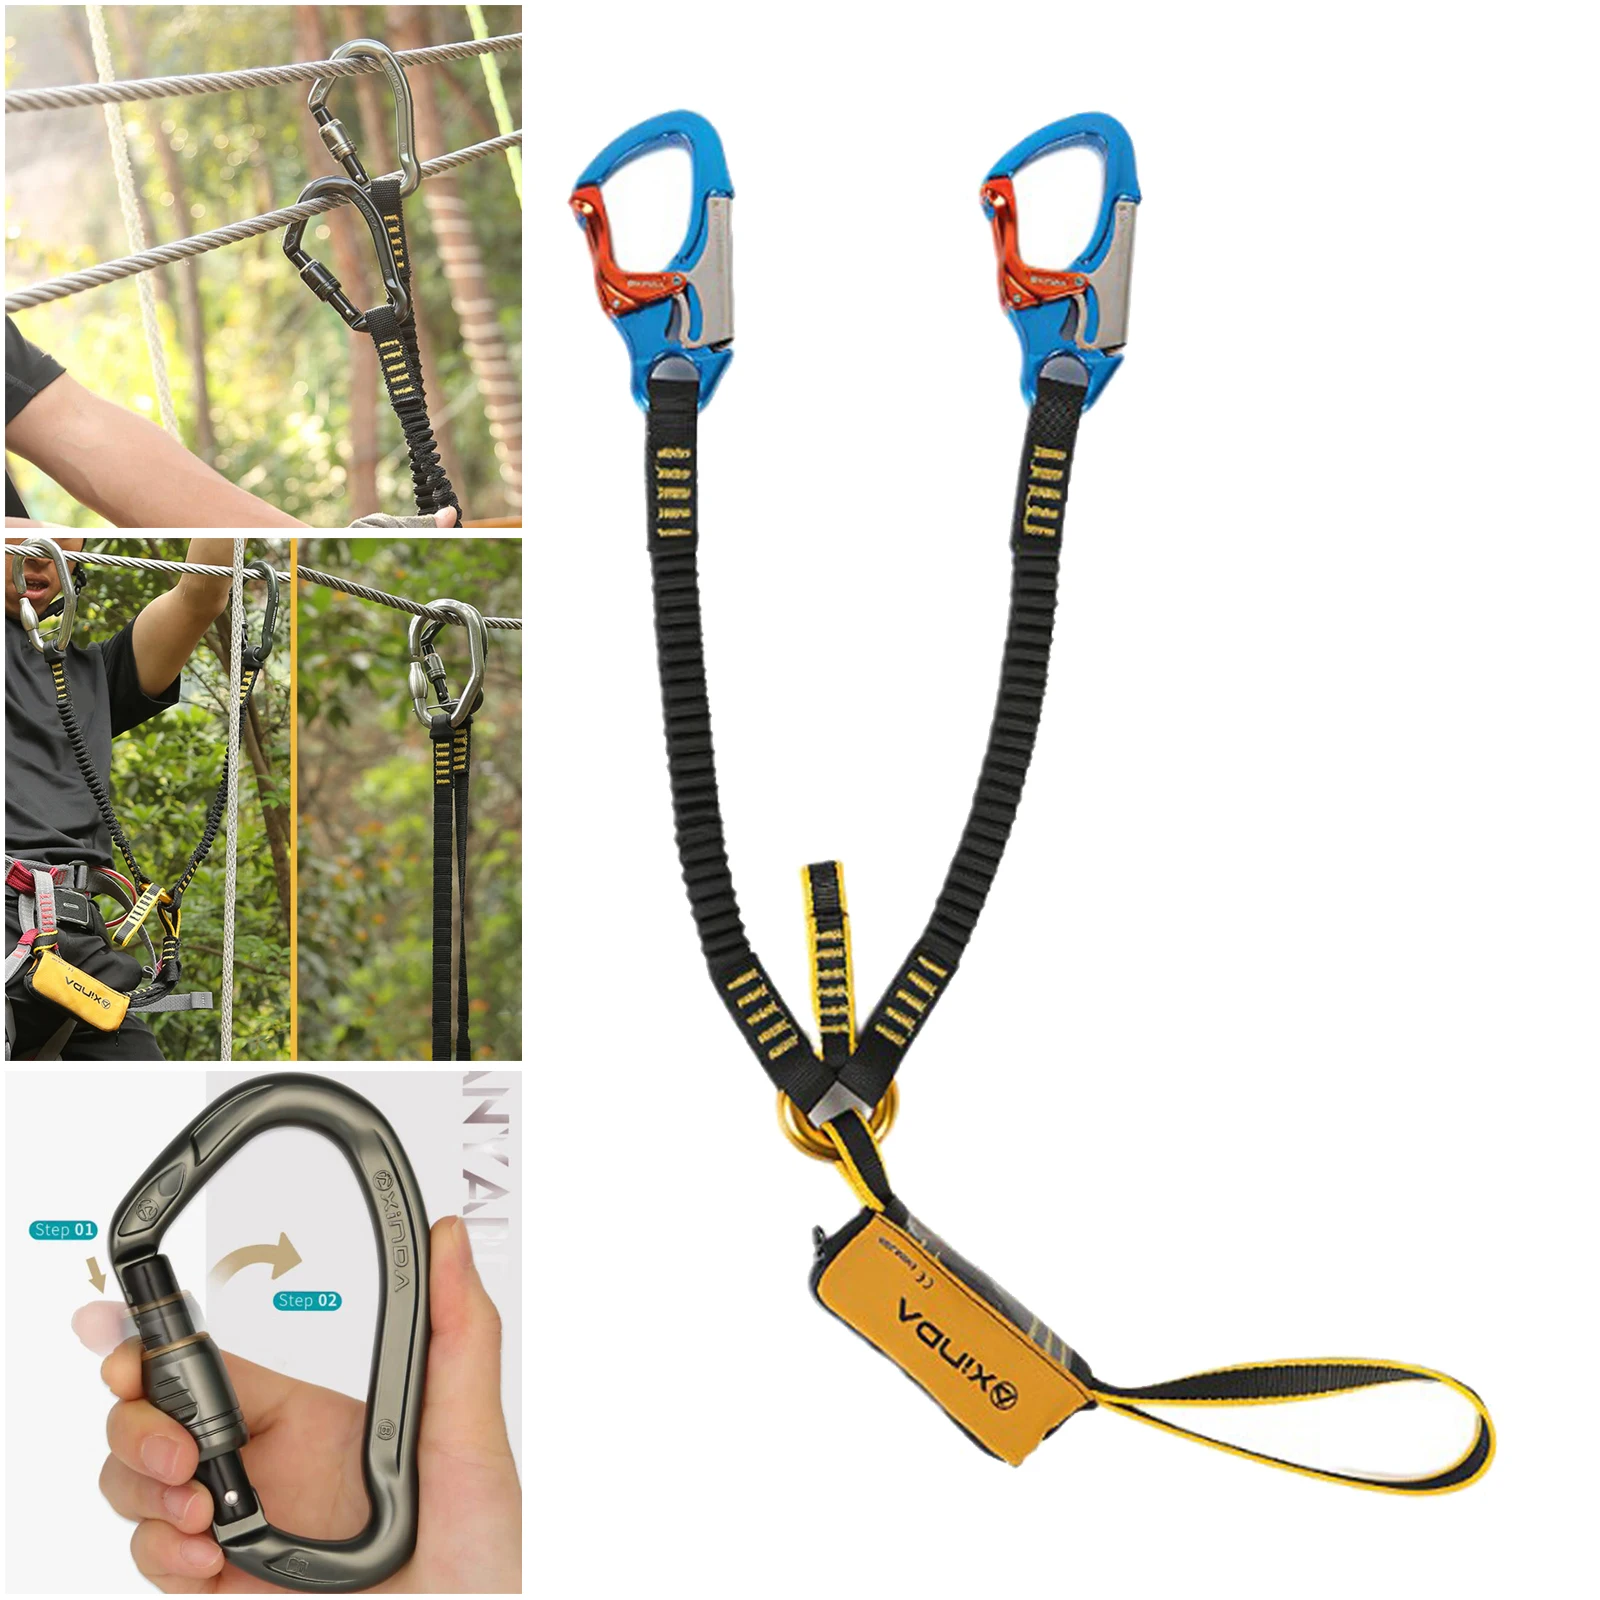 Safety Lanyard Shock Absorbing Anti-Fall Harness Sling Belt Protective Cord